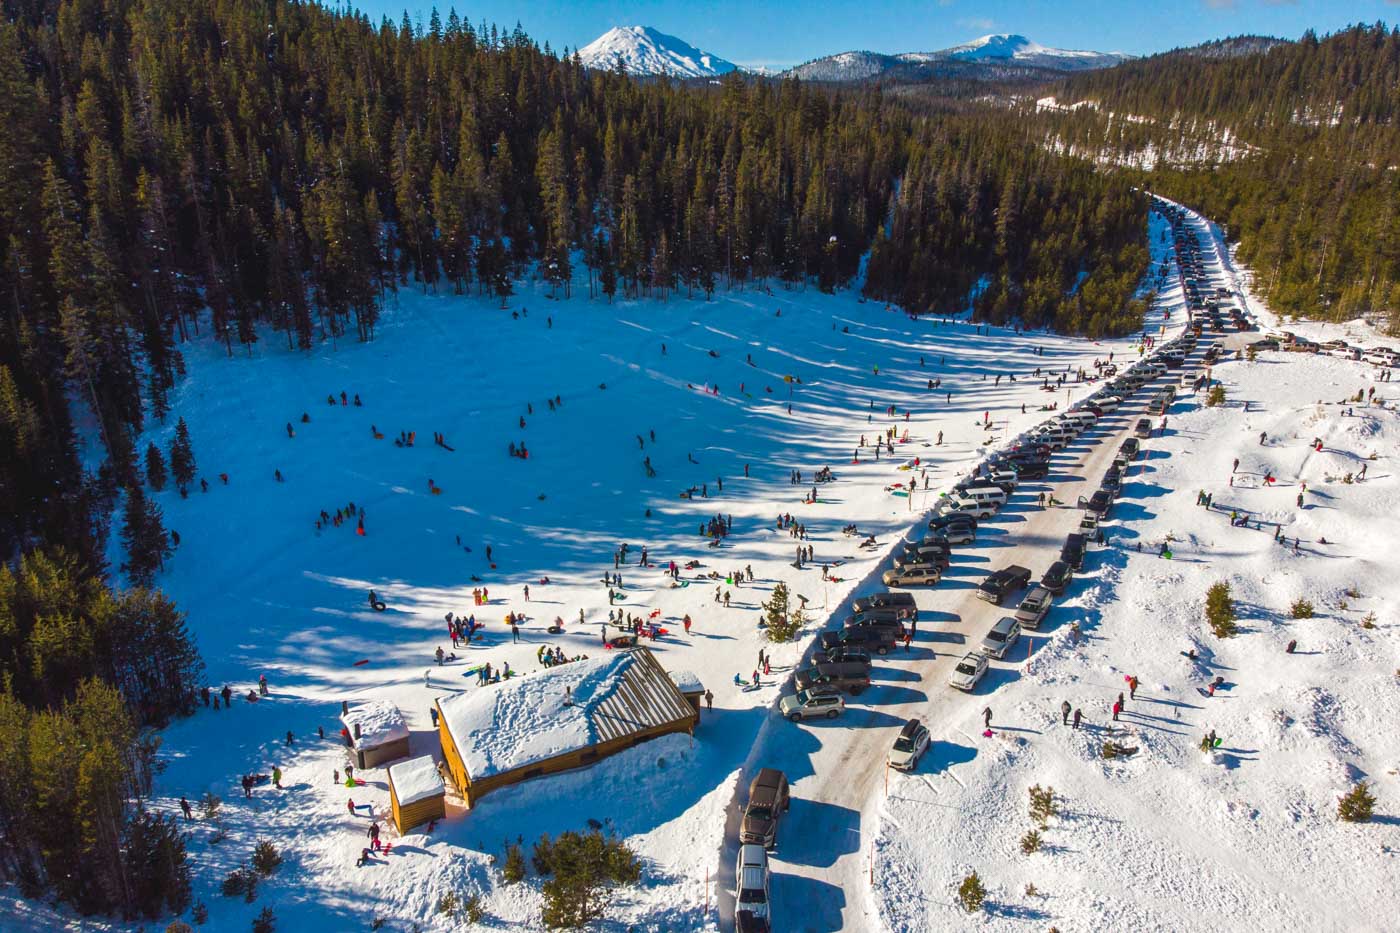 Crowds gathered at Wanoga Snow Park in Bend to participate in winter tubing.